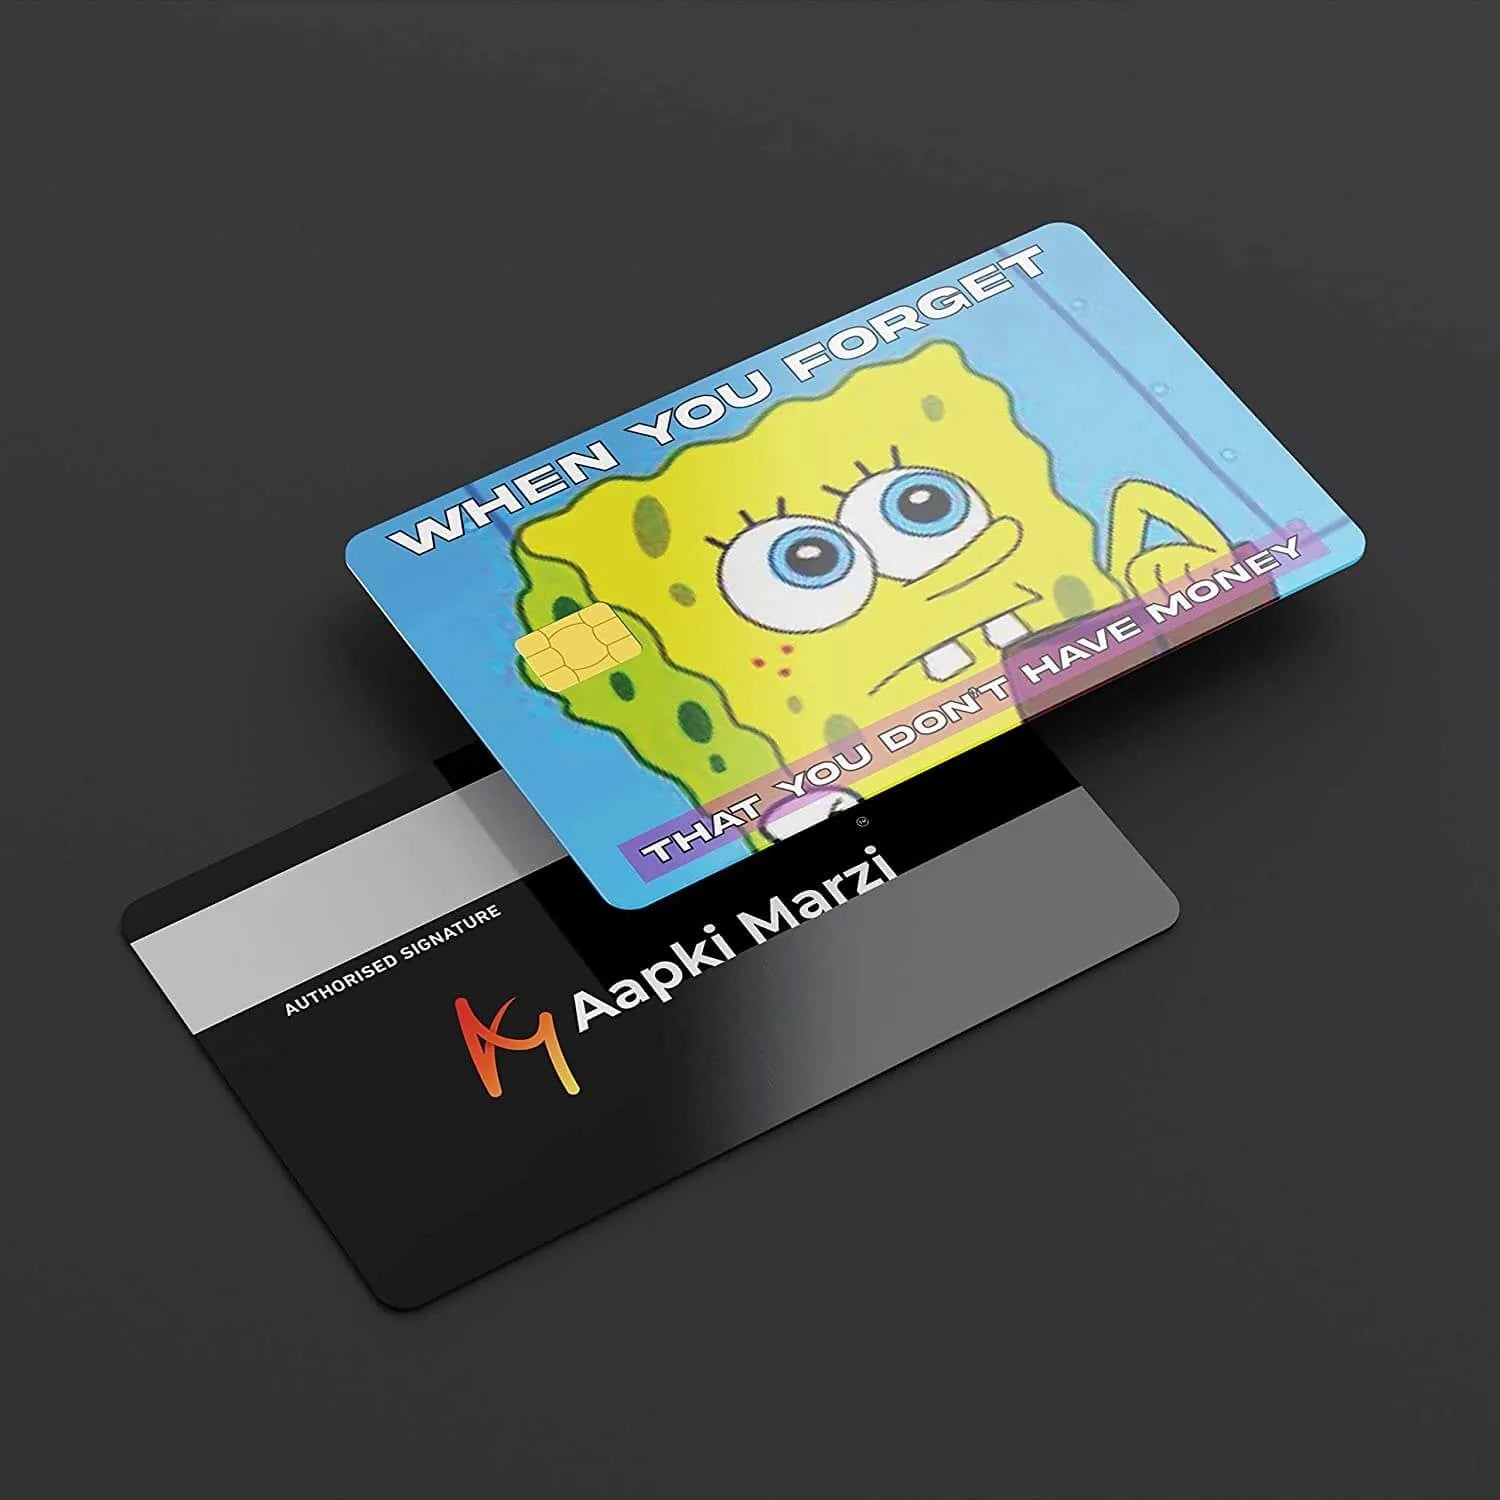 You Don't Have Money credit card skins